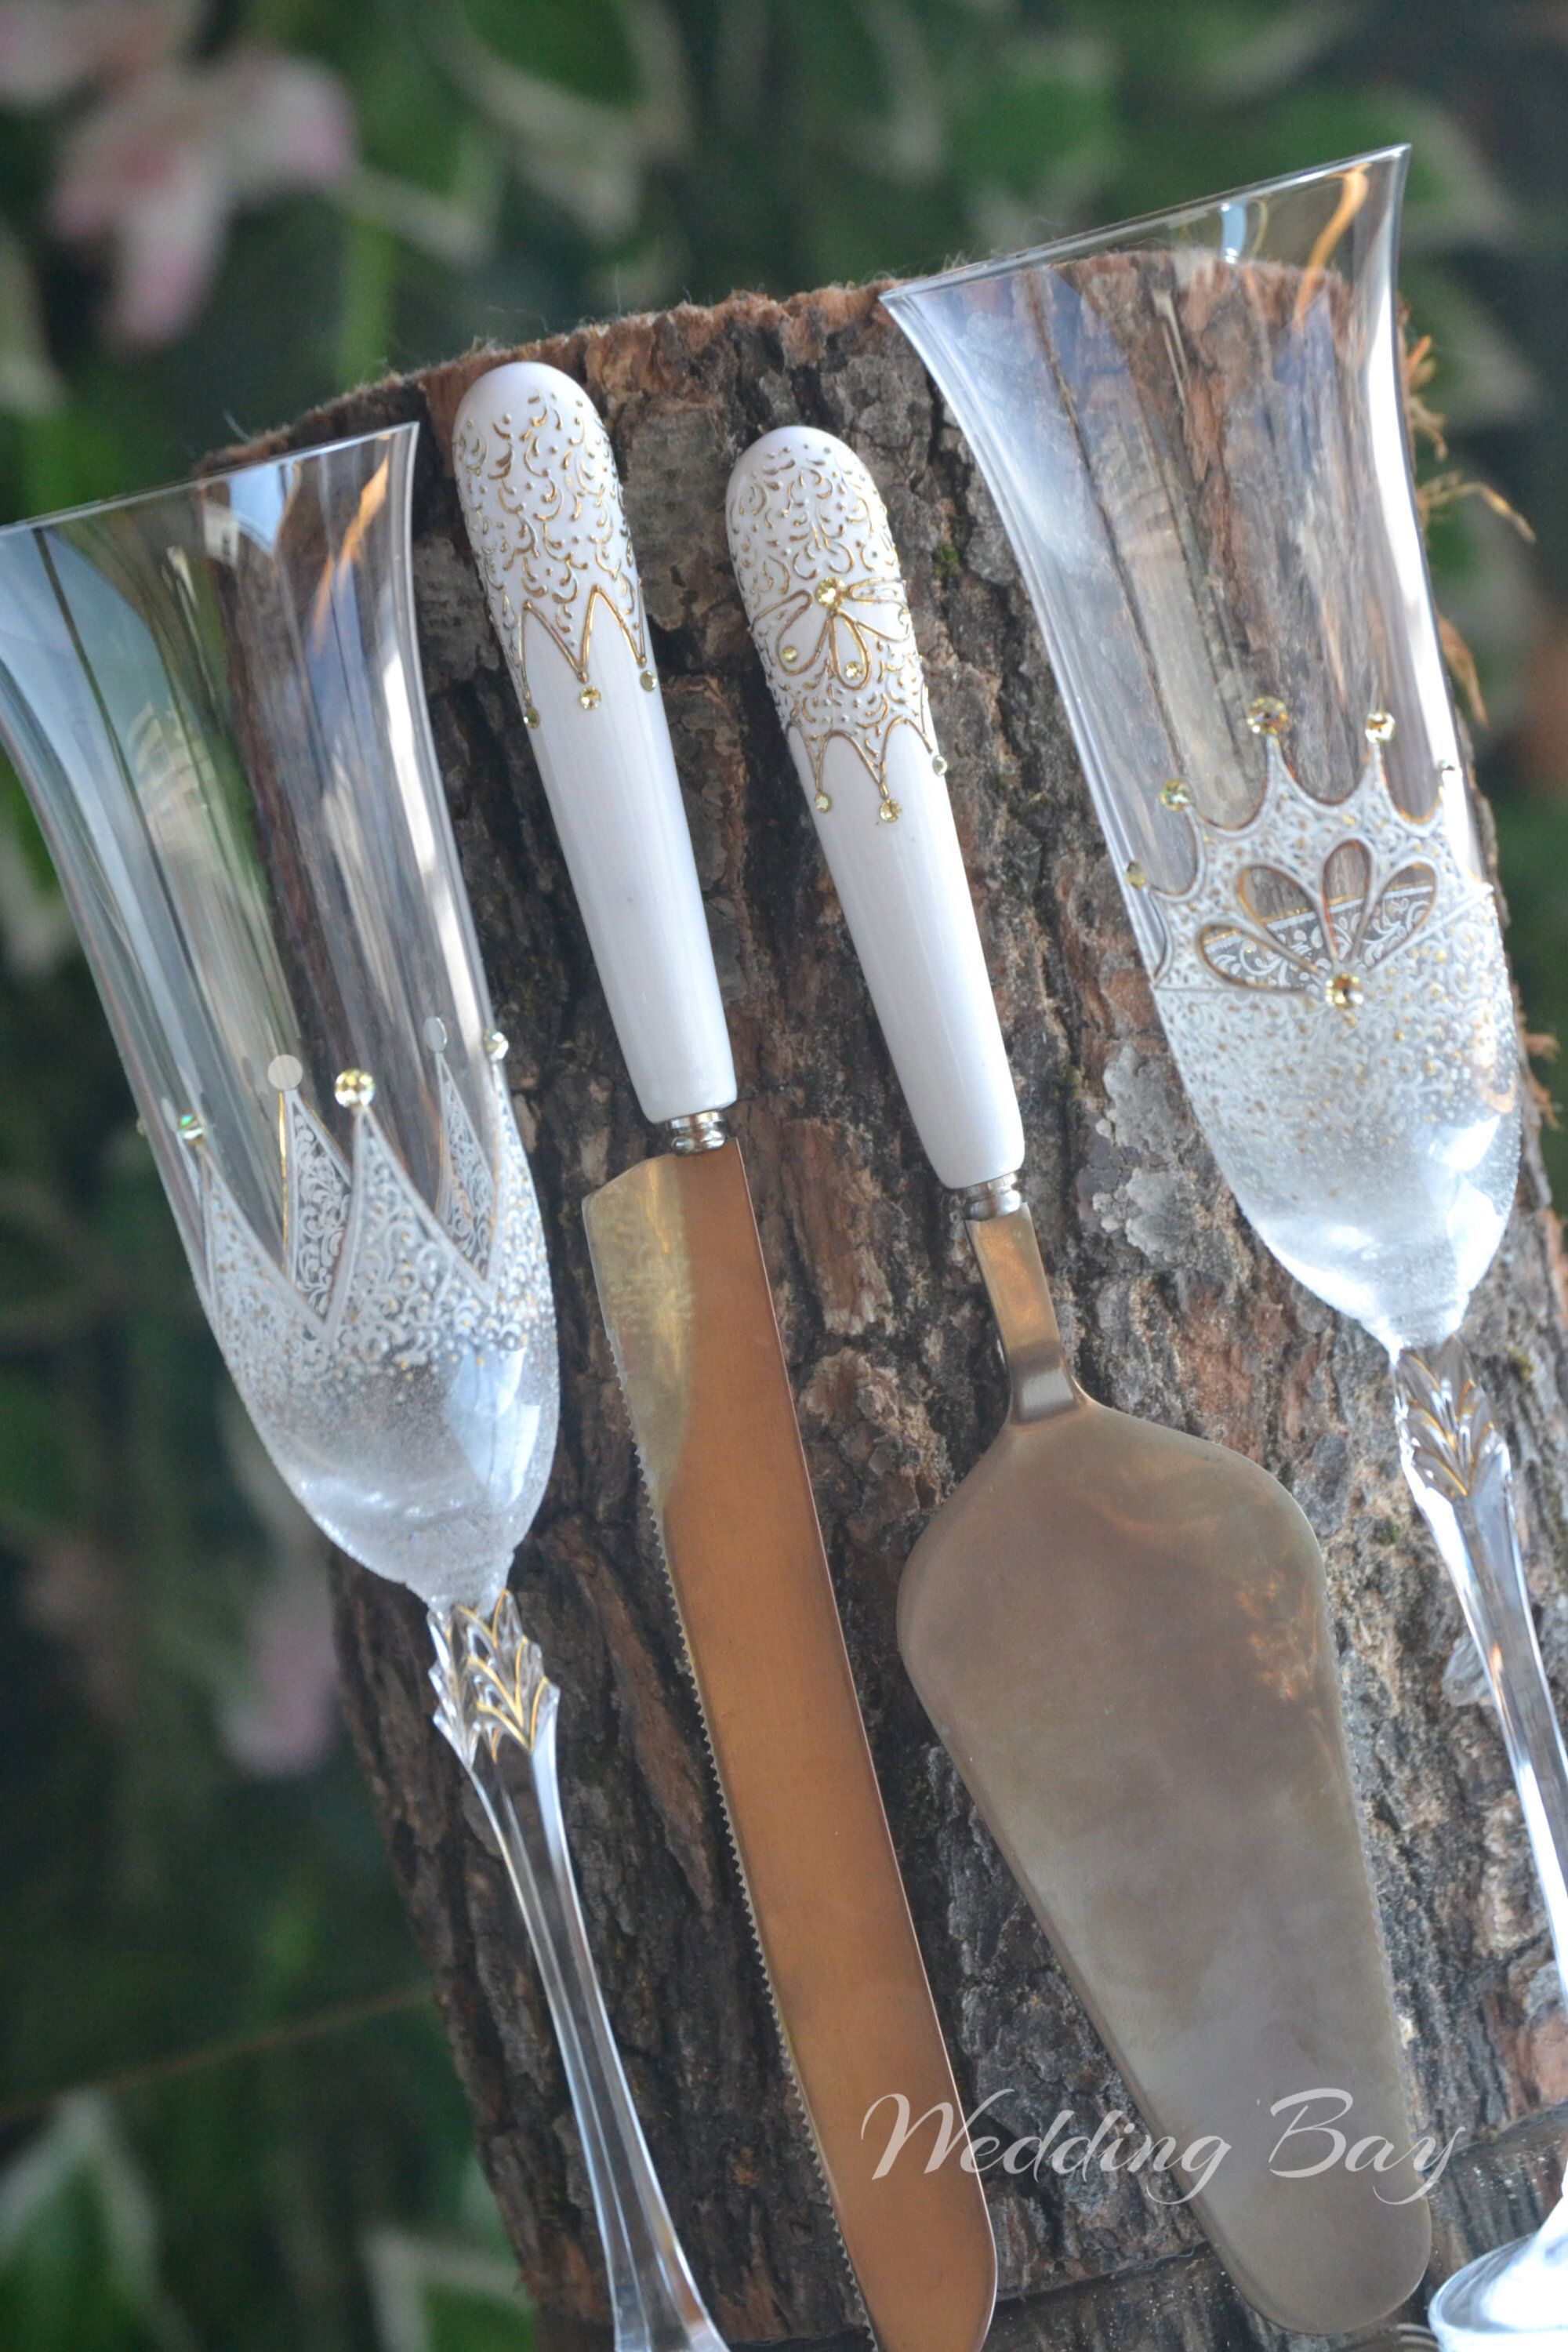 Royal Wedding Glasses and Matching  Cake Serving Set - King and Queen crown glasses, cake server and knife -   15 cake Wedding royal ideas